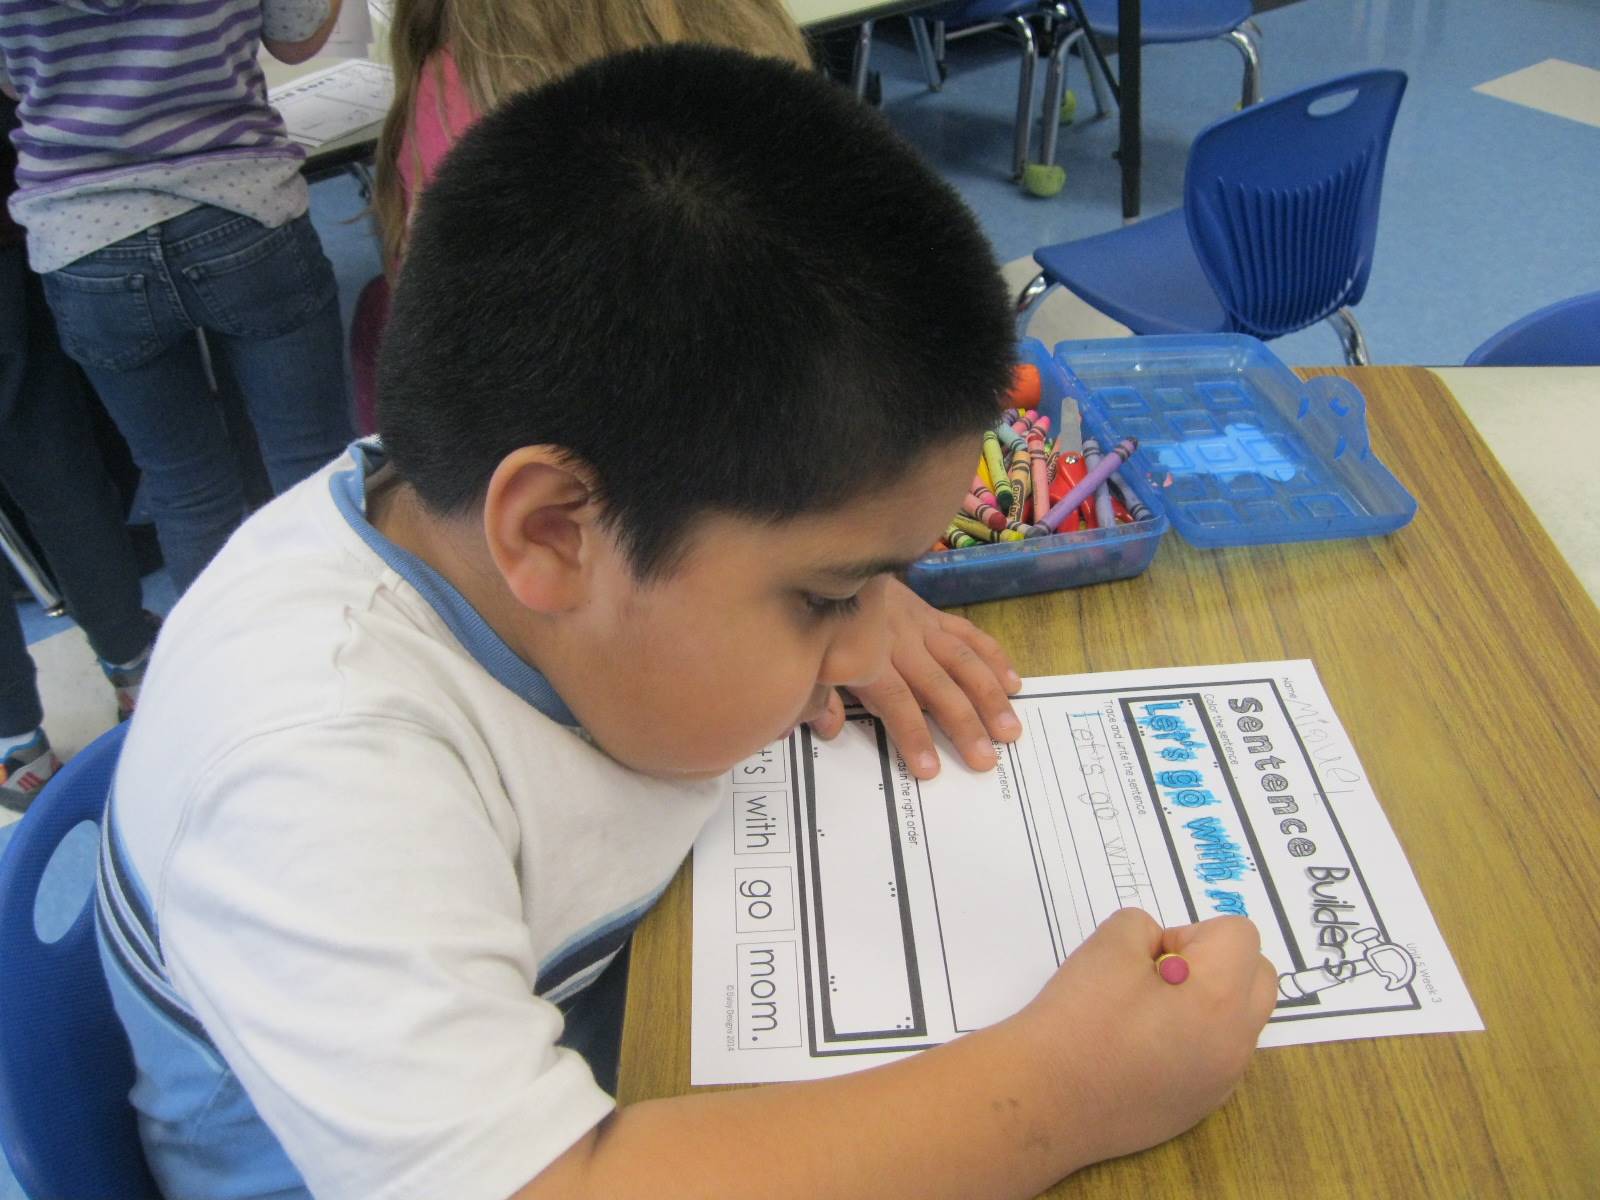 A student demonstrates a focused worker.